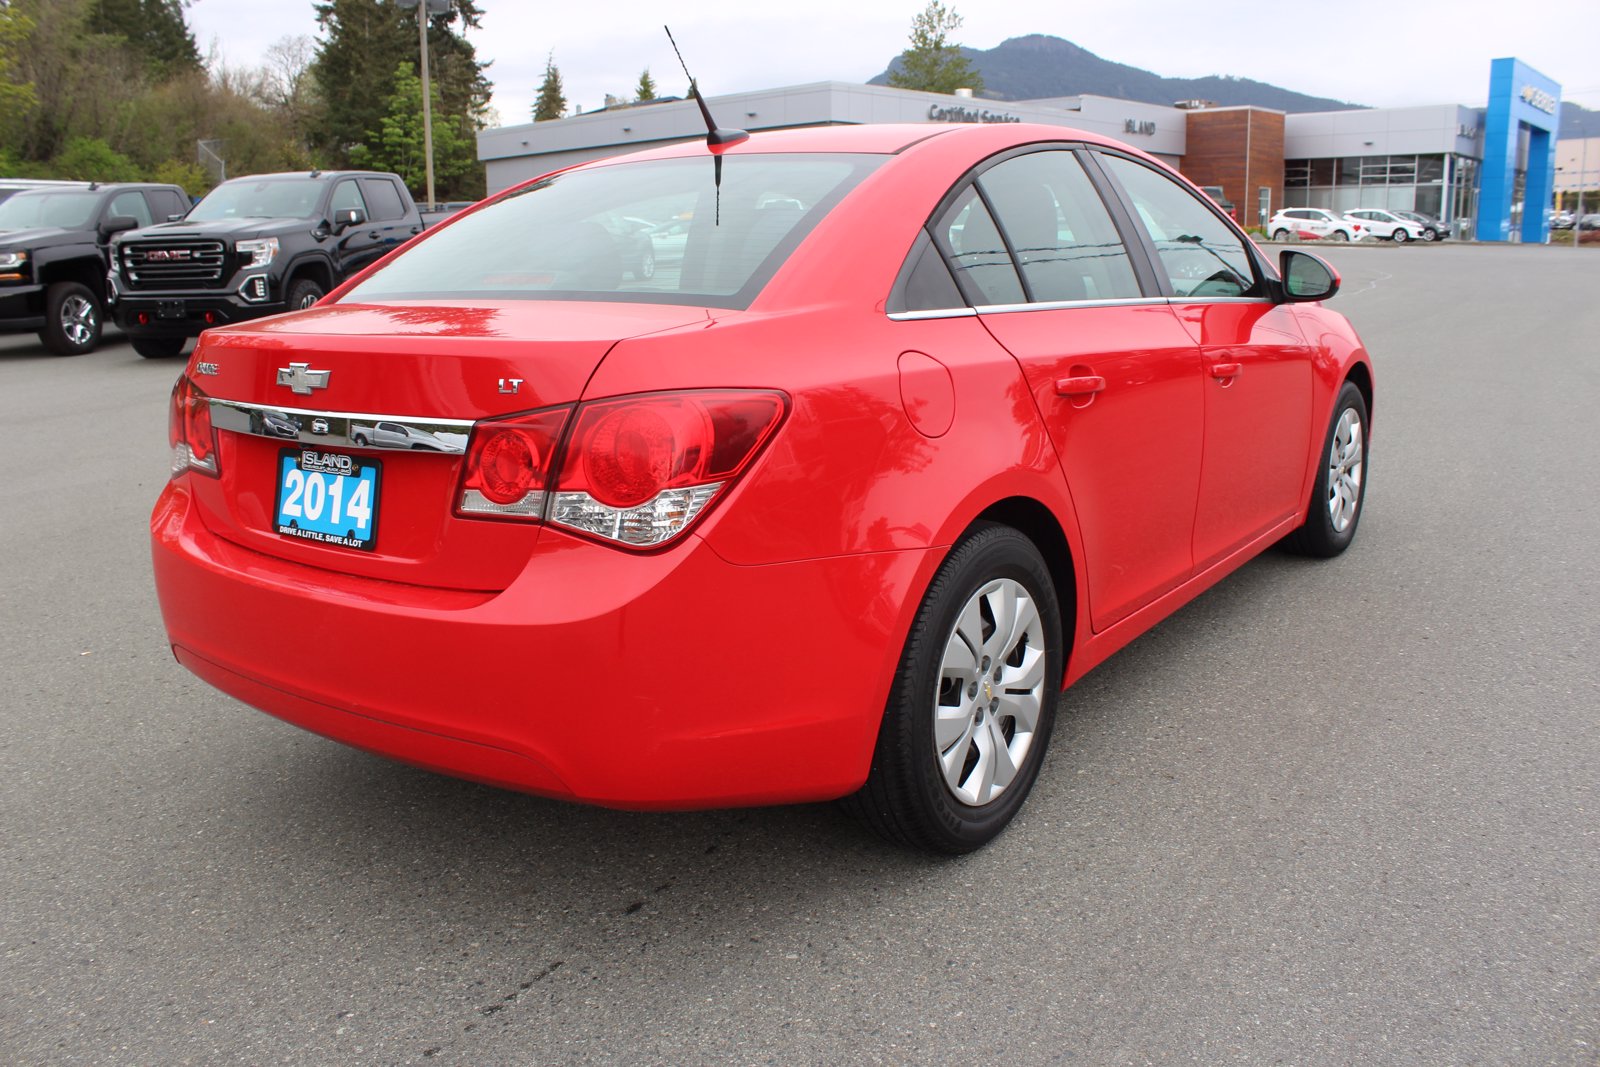 PreOwned 2014 Chevrolet Cruze 1LT 4dr Car in Duncan 